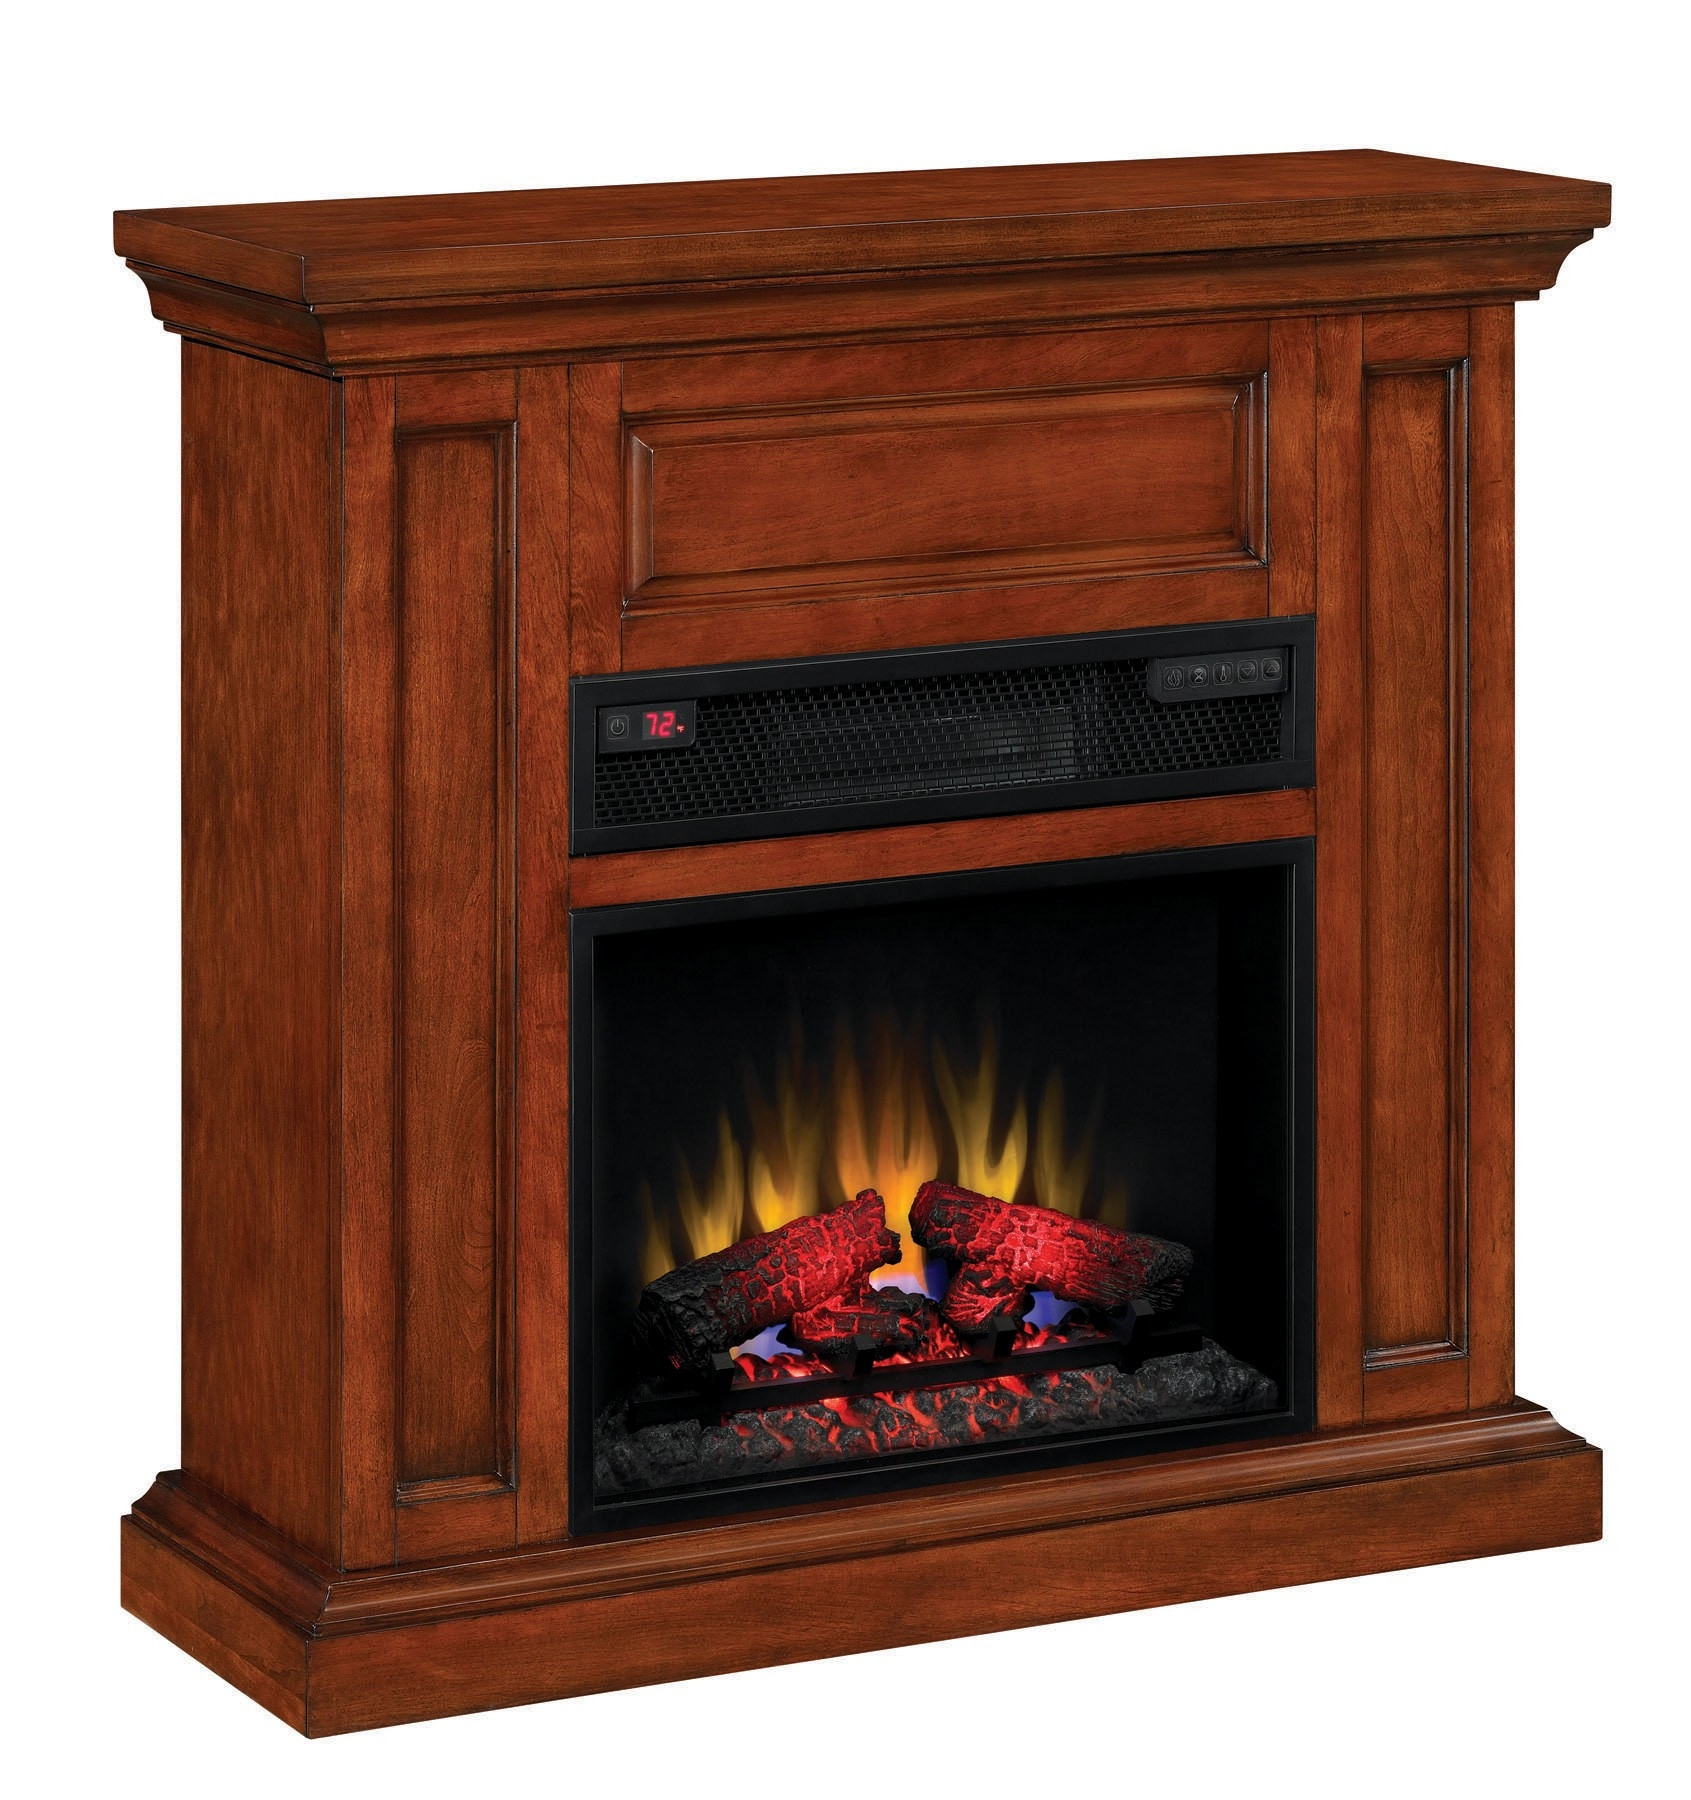 Twinstar Electric Fireplace
 15 Twin Star Electric Fireplace Troubleshooting